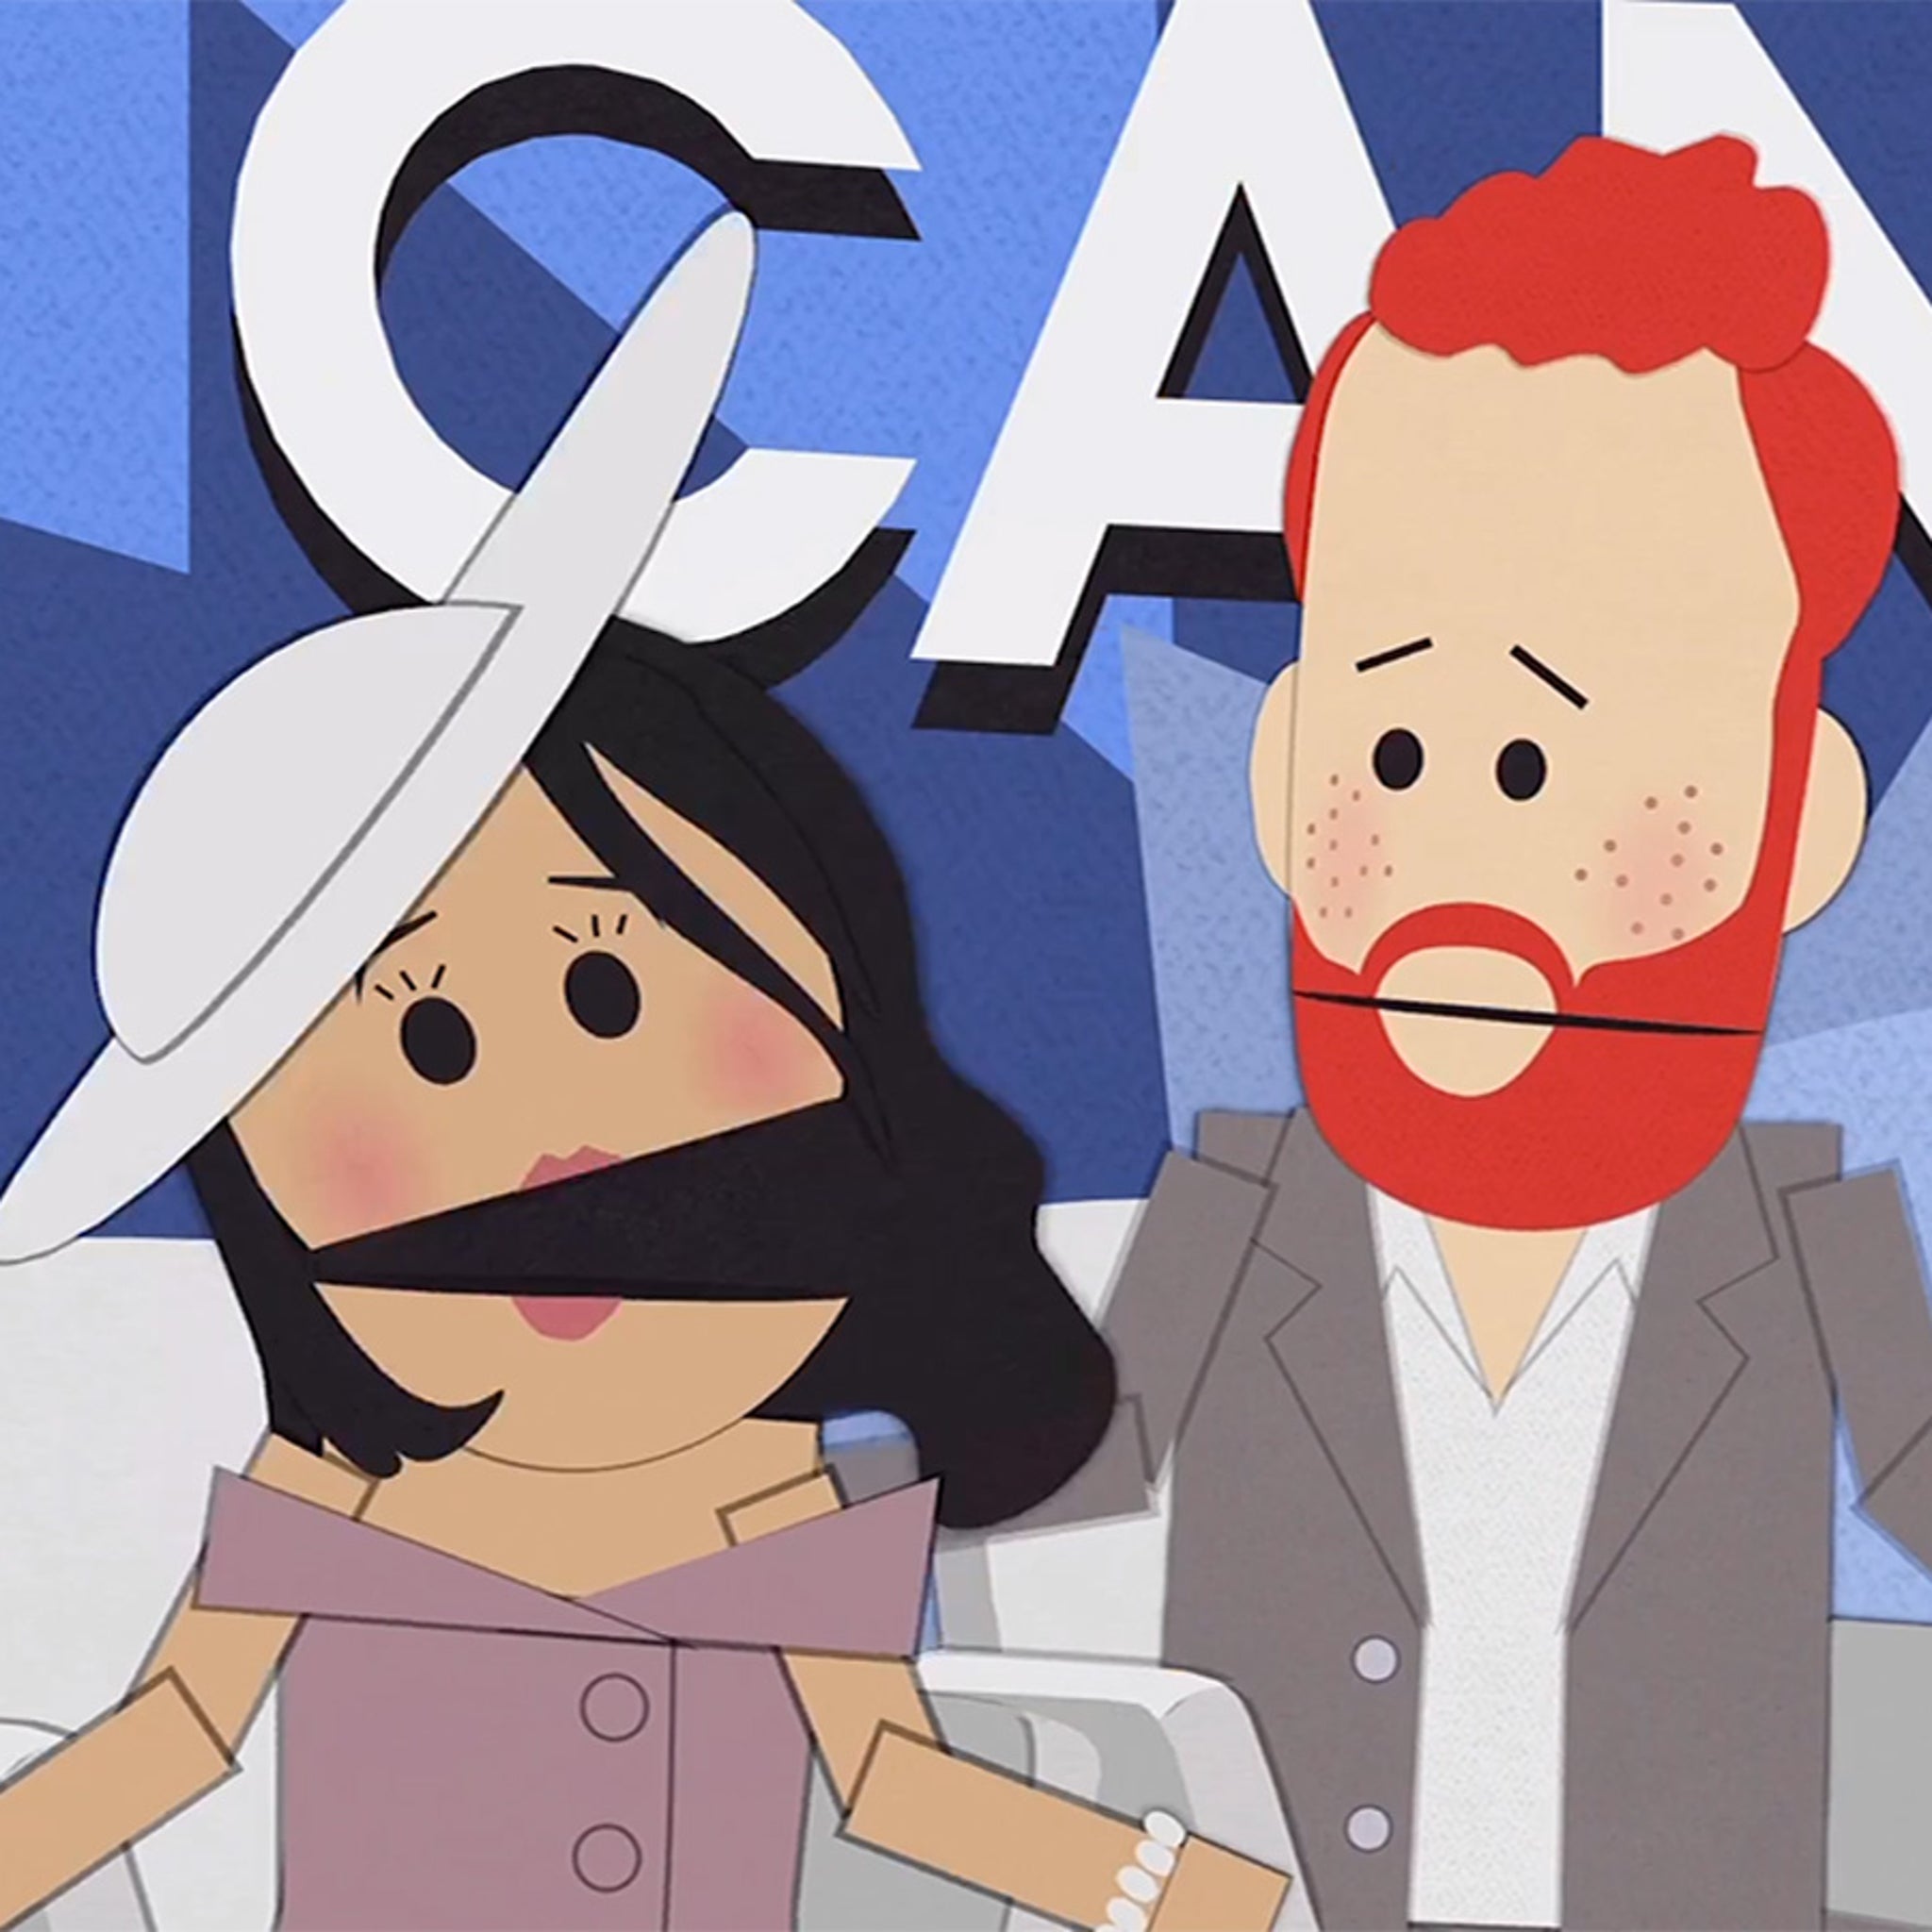 South Park's Harry and Meghan parody proves one thing